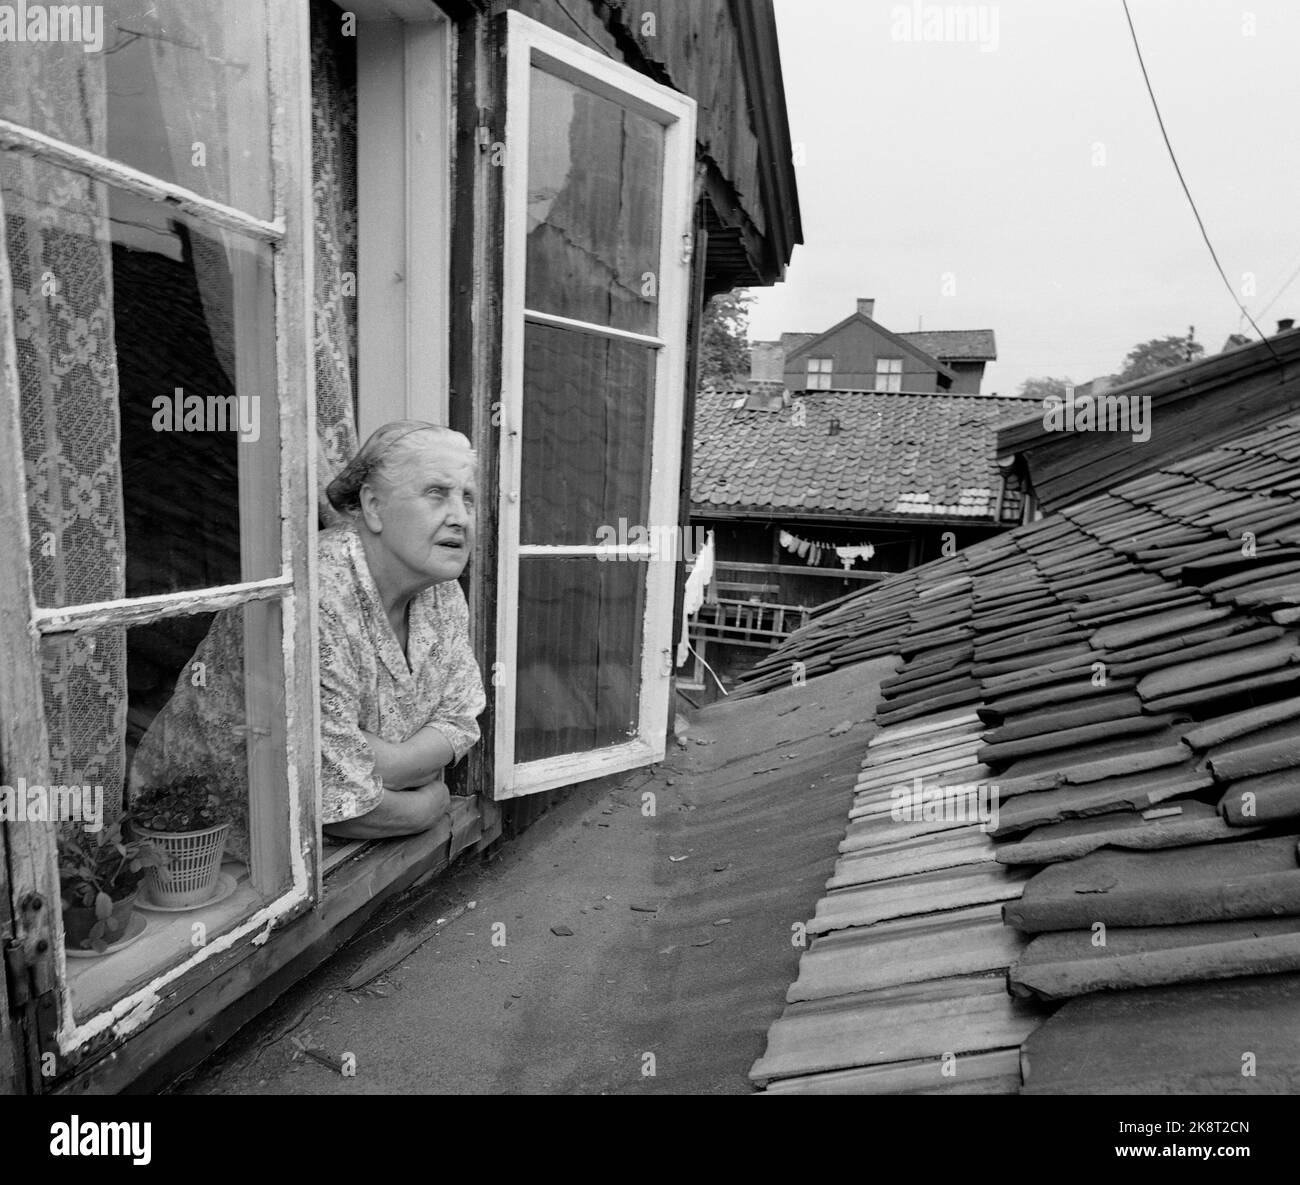 Oslo May 1966 at Rodeløkka has been more or less quiet for 150 years. The old houses are both shaky and crooked and marked by decay, but people thrive and will not move or modernize. Inga Thyssell has lived here for 57 years. Here she studies the view from the window, which is mostly roof tiles and male cats according to her. Old lady who looks out of a window with lace curtains and flower pots. Photo: Storløkken / Current / NTB Stock Photo